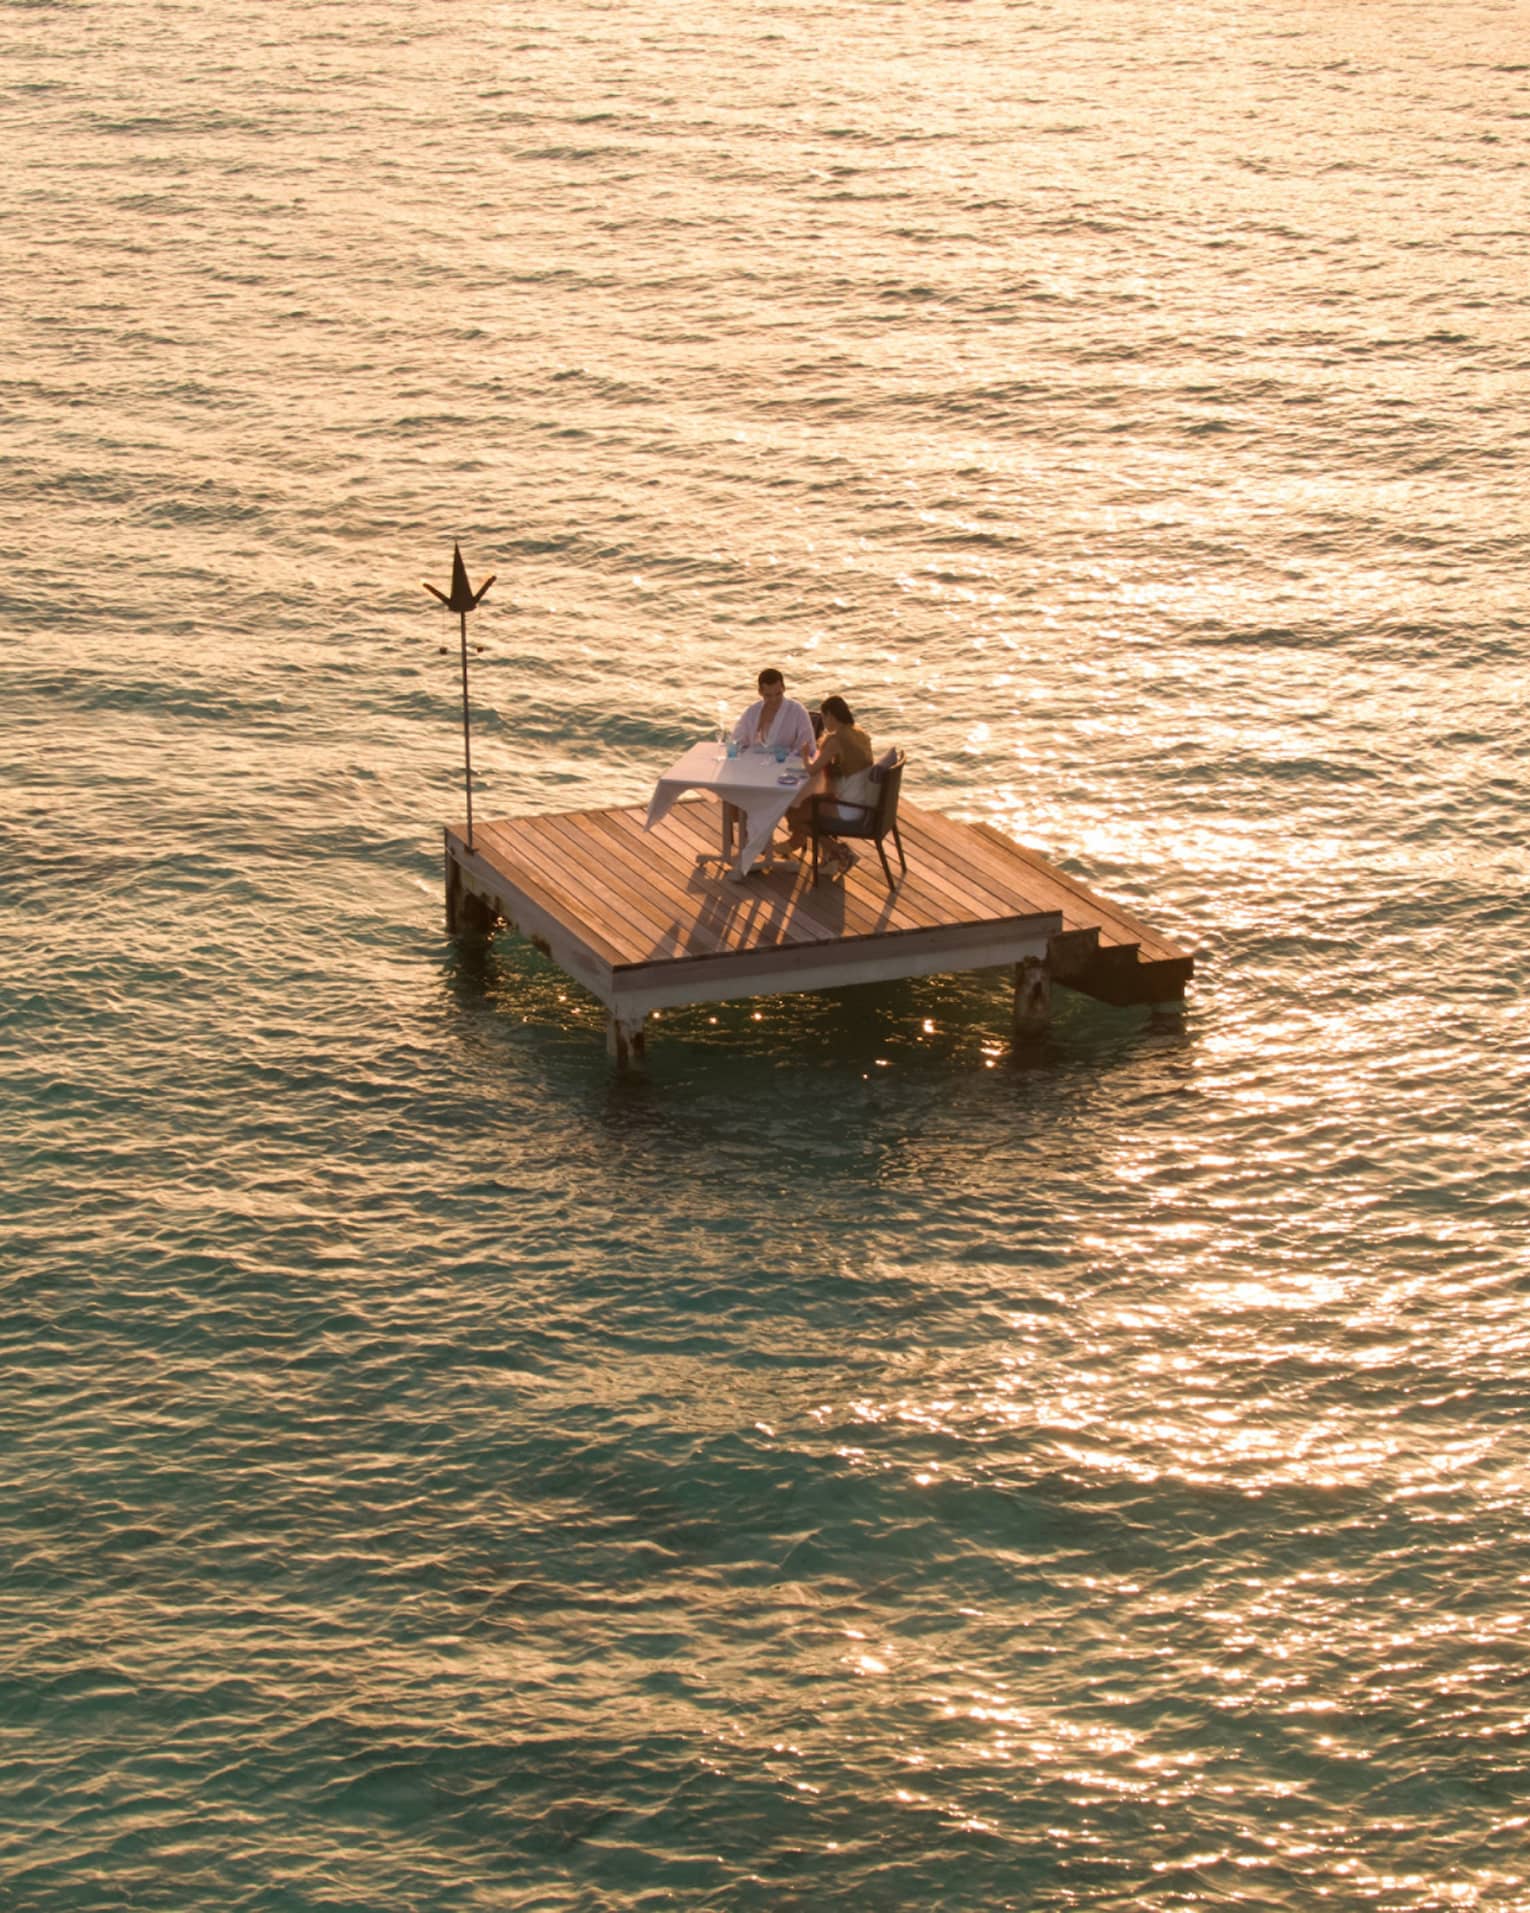 Aerial view of couple dining on small floating wood platform on moonlit lagoon